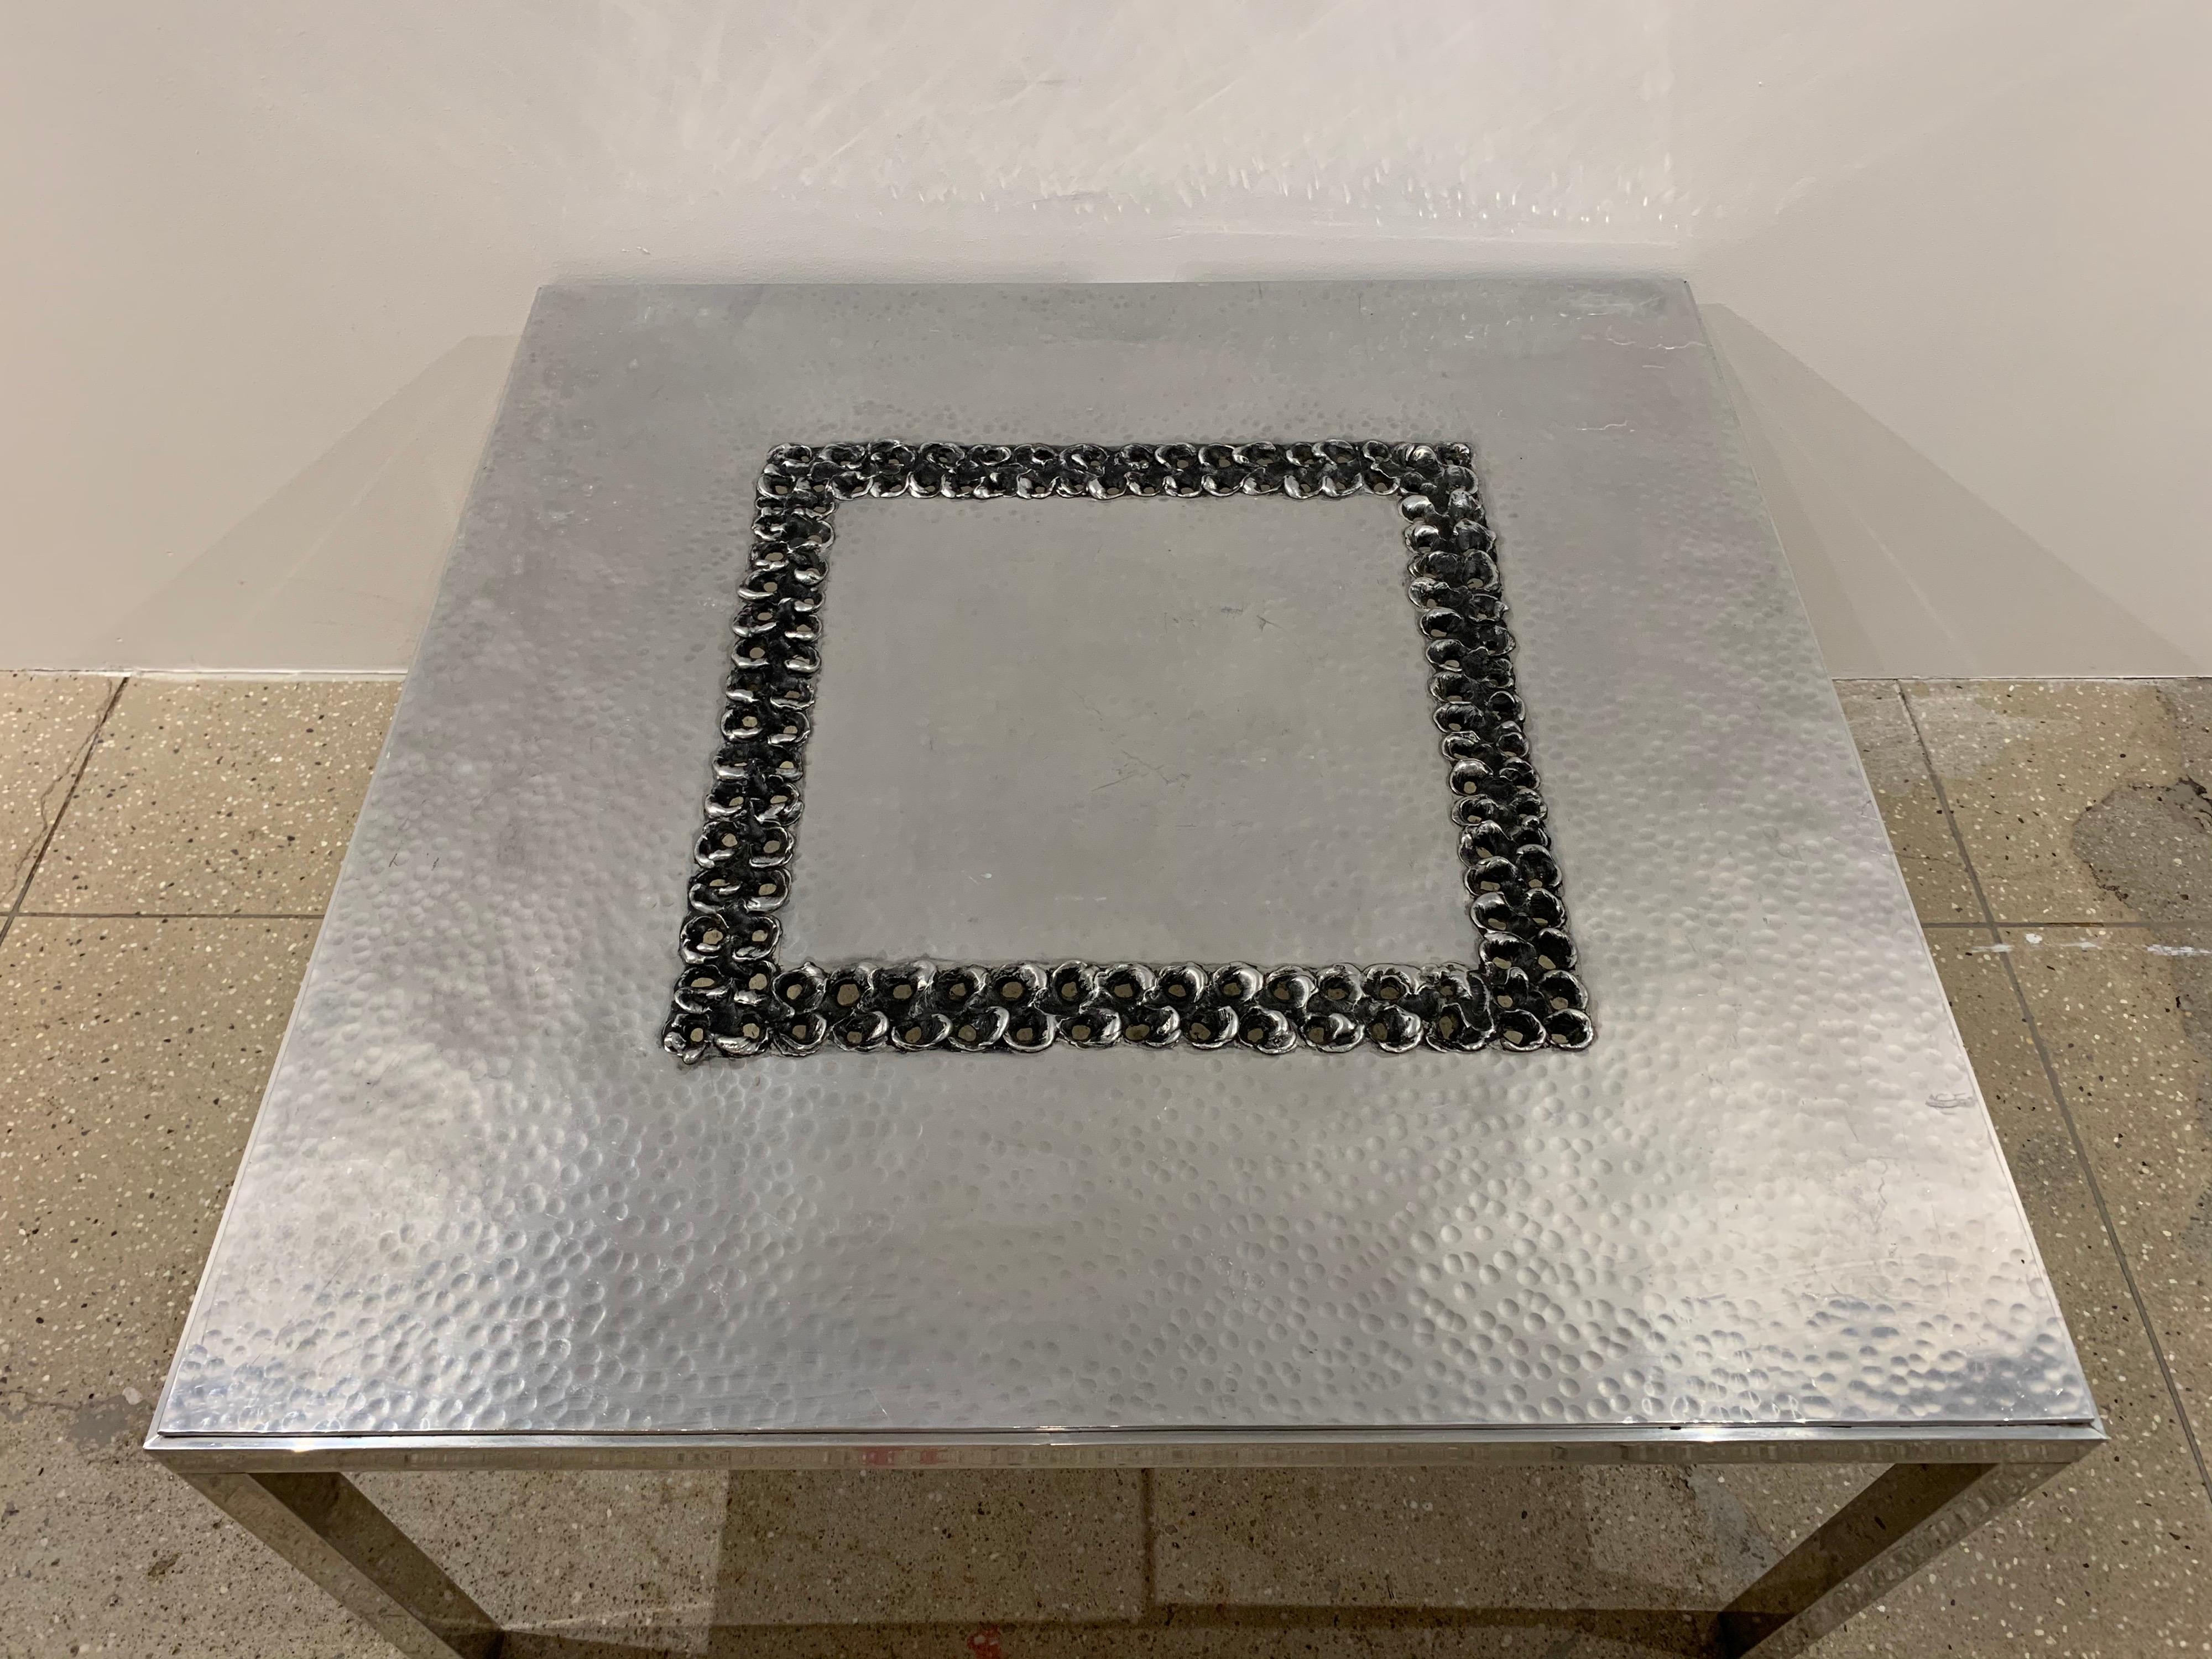 A handmade hammered and burnished aluminum coffee table by Belgian artist , Willy Luyckx for Aluclair.

Willy Luyckx was a goldsmith who worked for goldsmith Camille Colruyt before starting his own business in the 1960s. He also had an art center